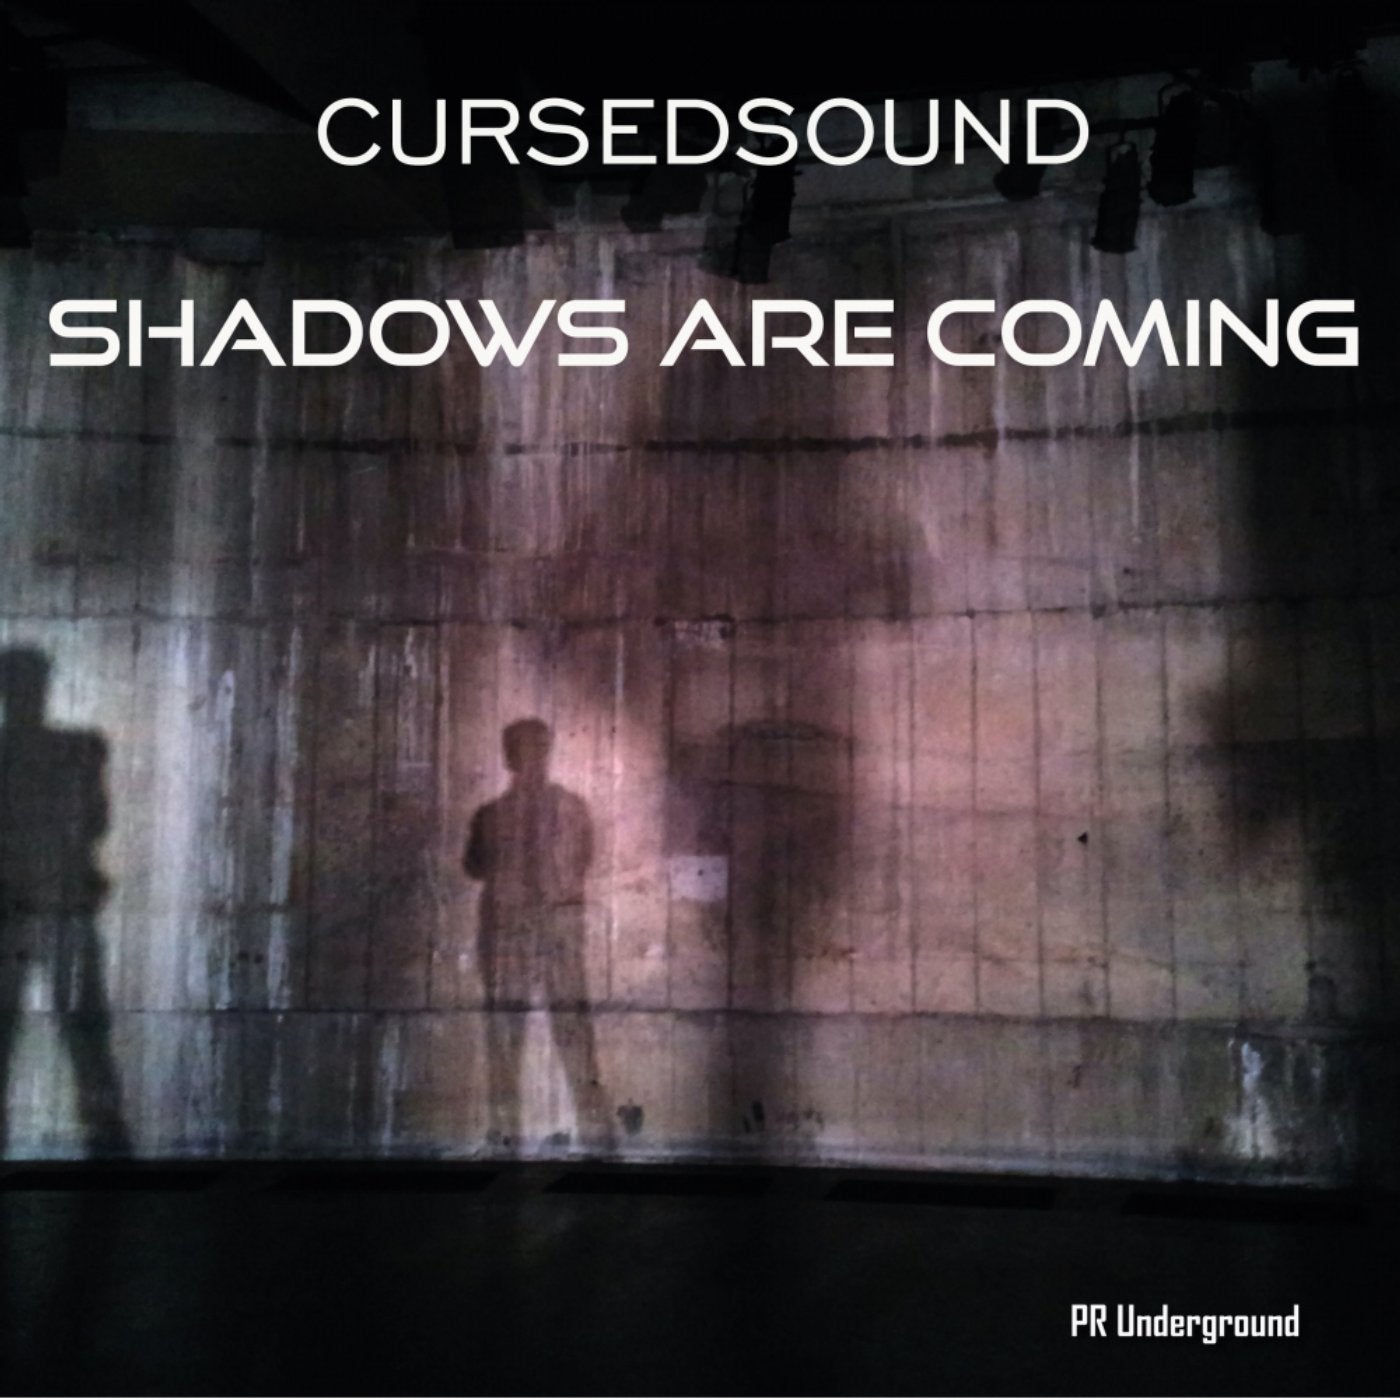 Shadows are coming